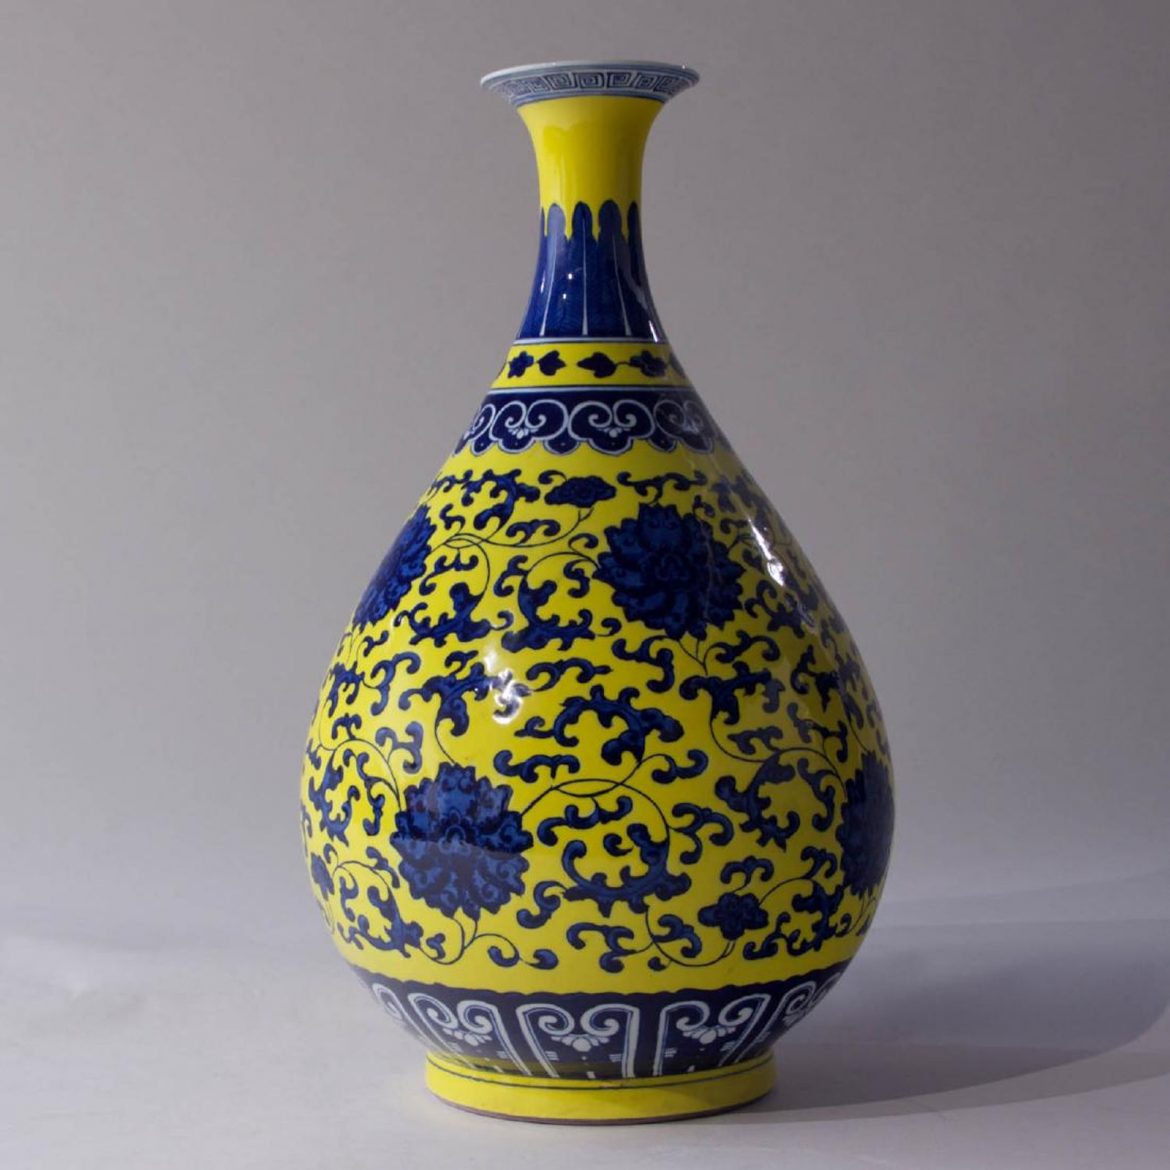 Vase With Blue Peony Flowers on Yellow Ground